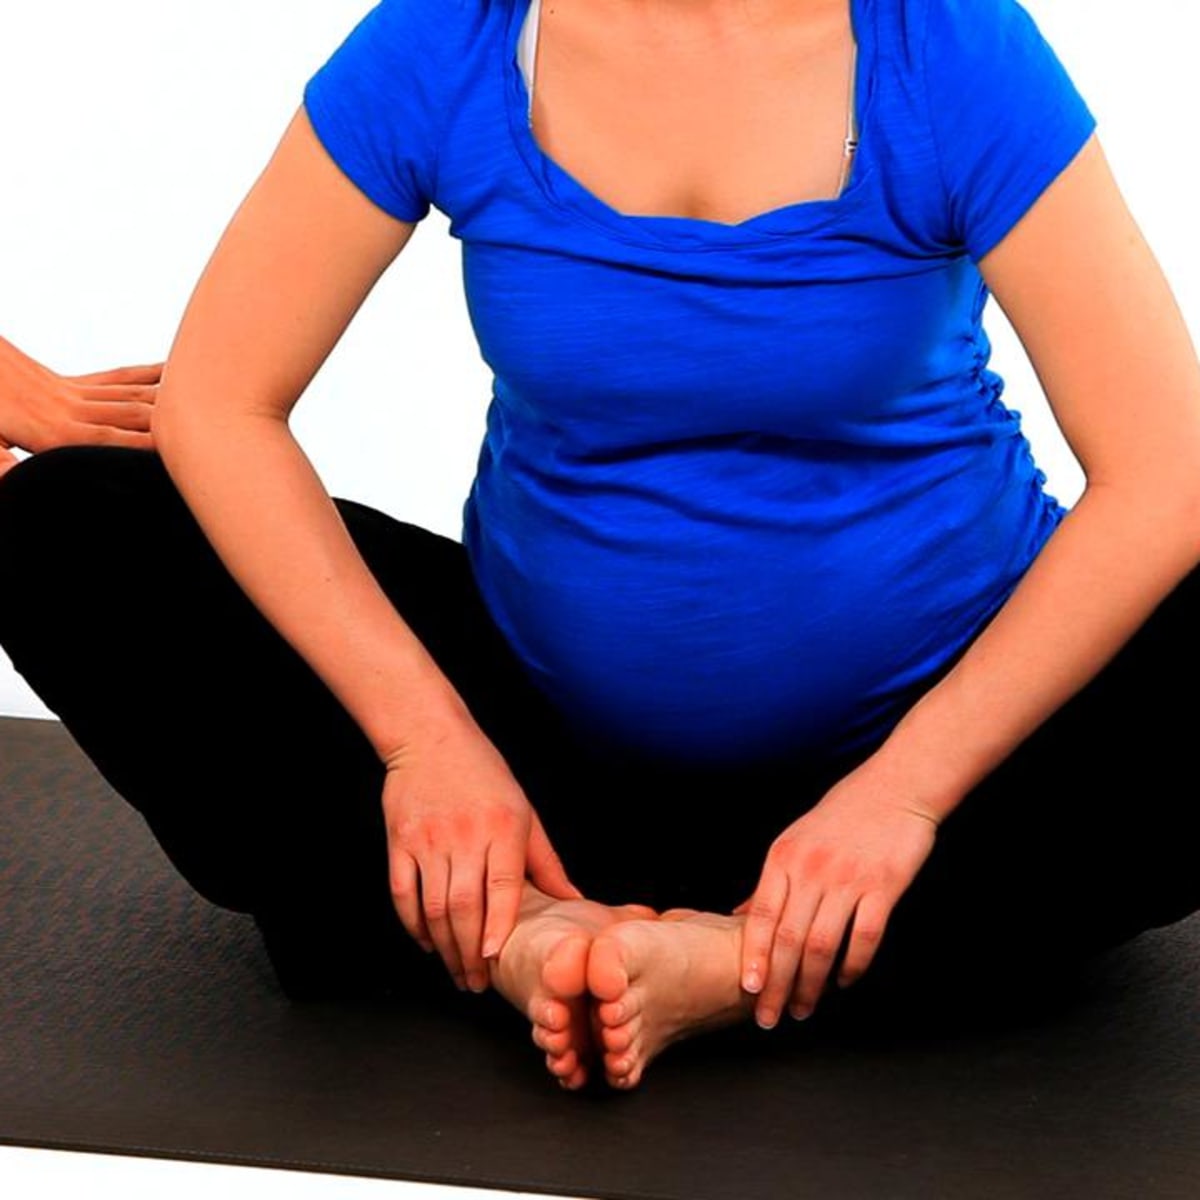 Yoga During Pregnancy: Do's and Don'ts. Nike SI